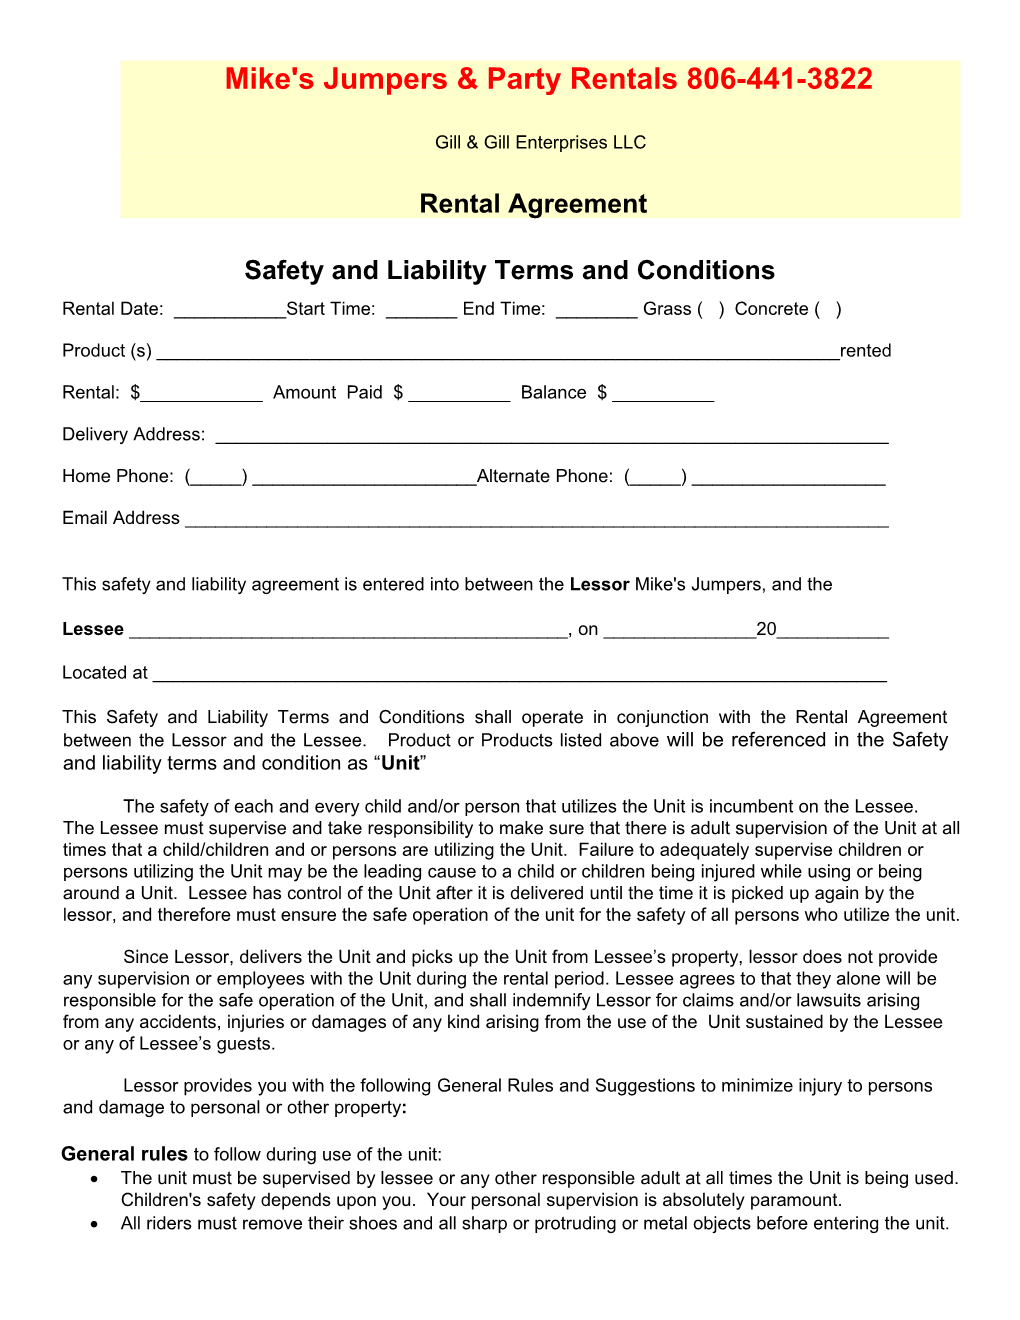 Safety and Liability Terms and Conditions